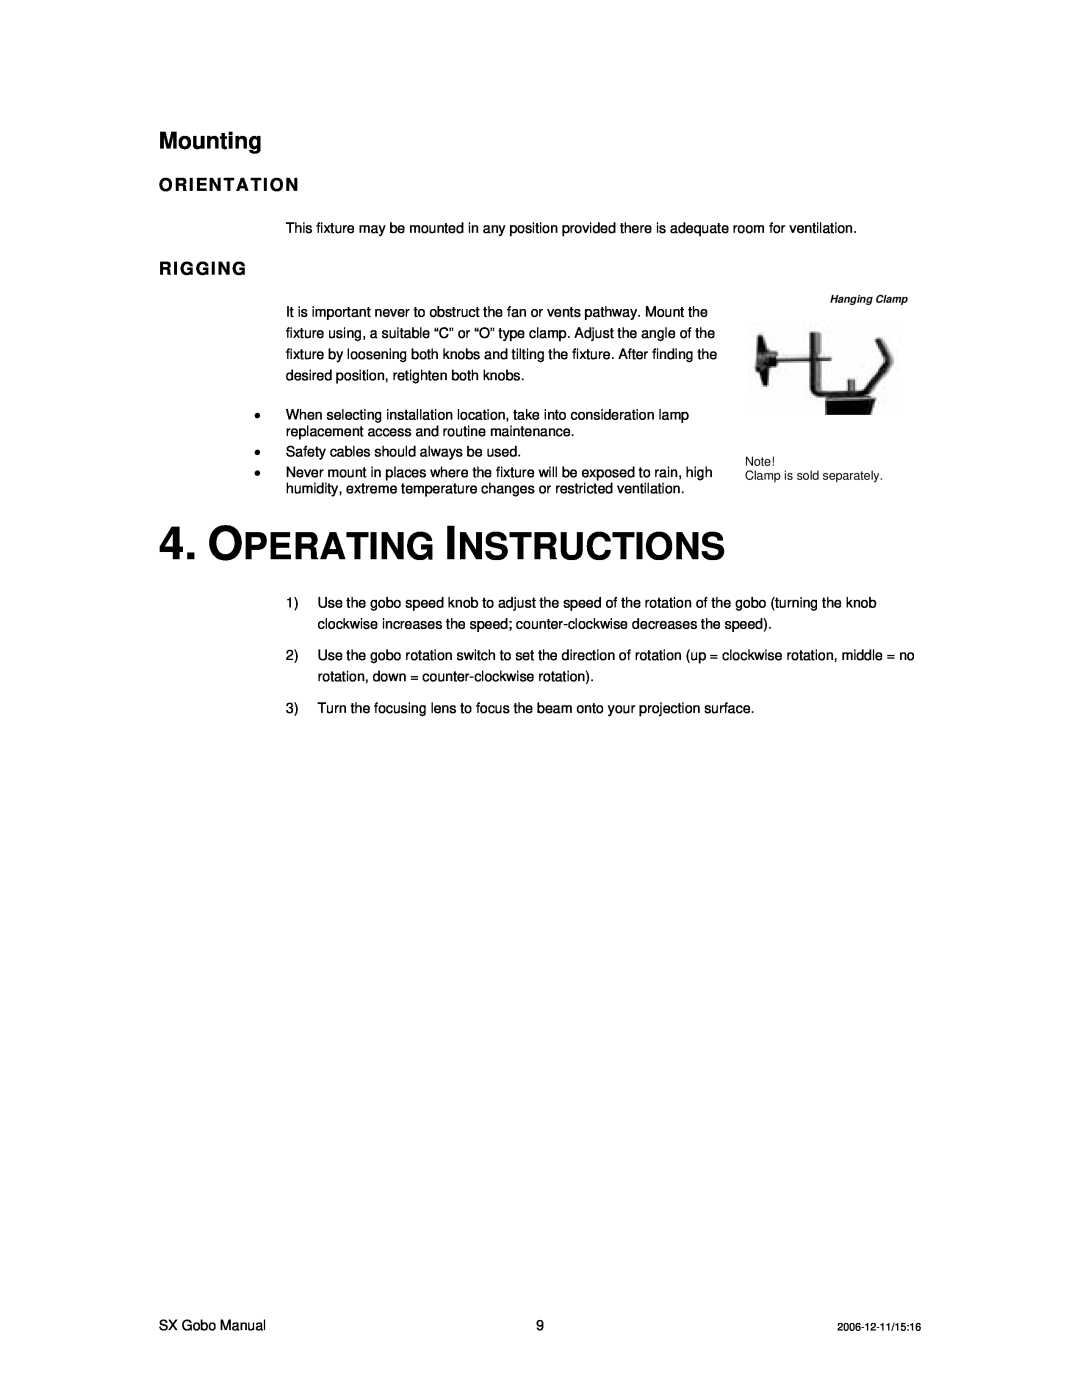 Chauvet DMX512 user manual Operating Instructions, Mounting, Orientation, Rigging 